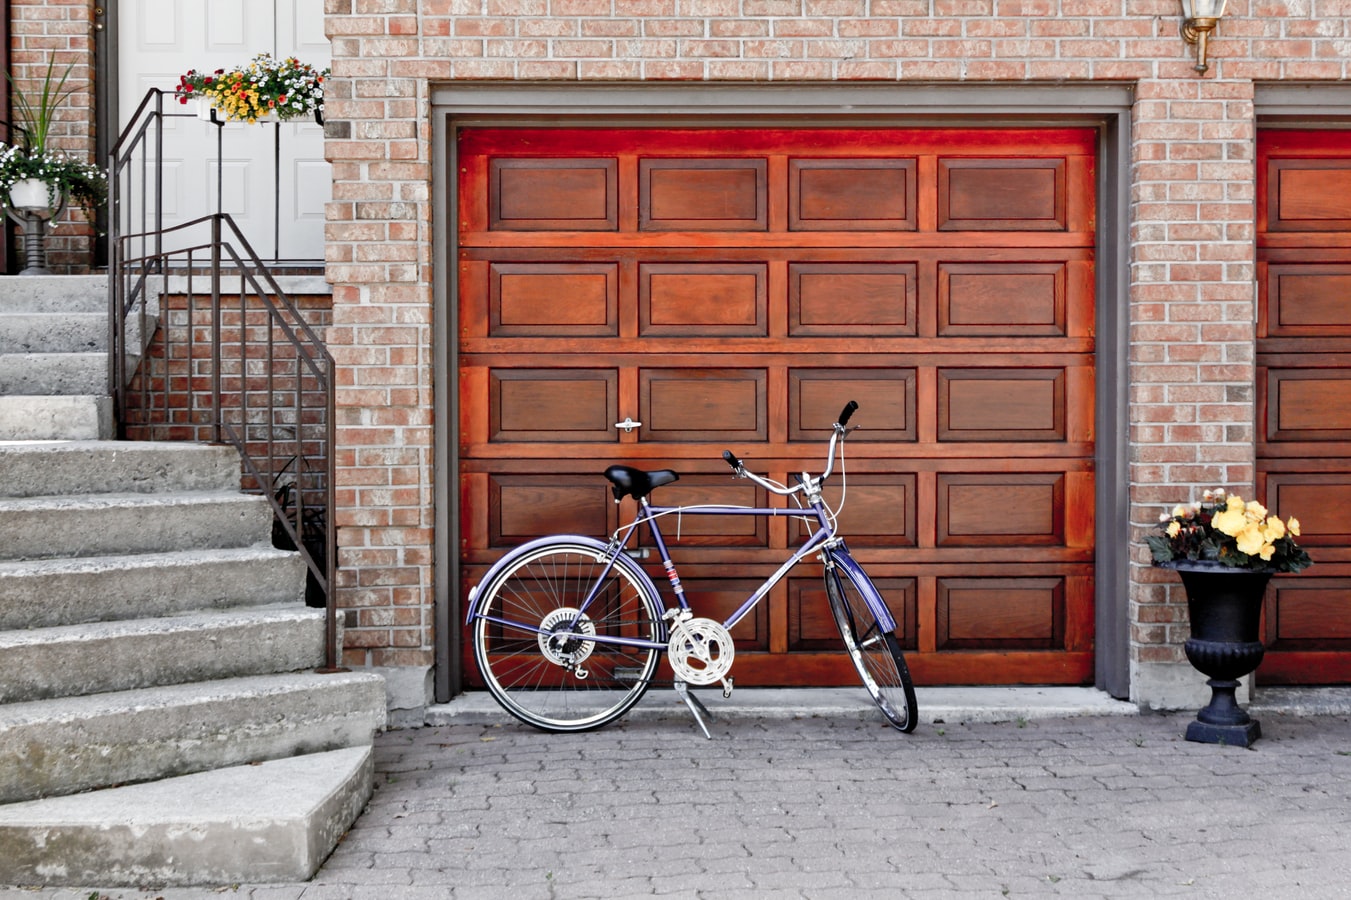 Garage door painted to look like wood. Bicycle parked in front. stairwell leading up to front door.